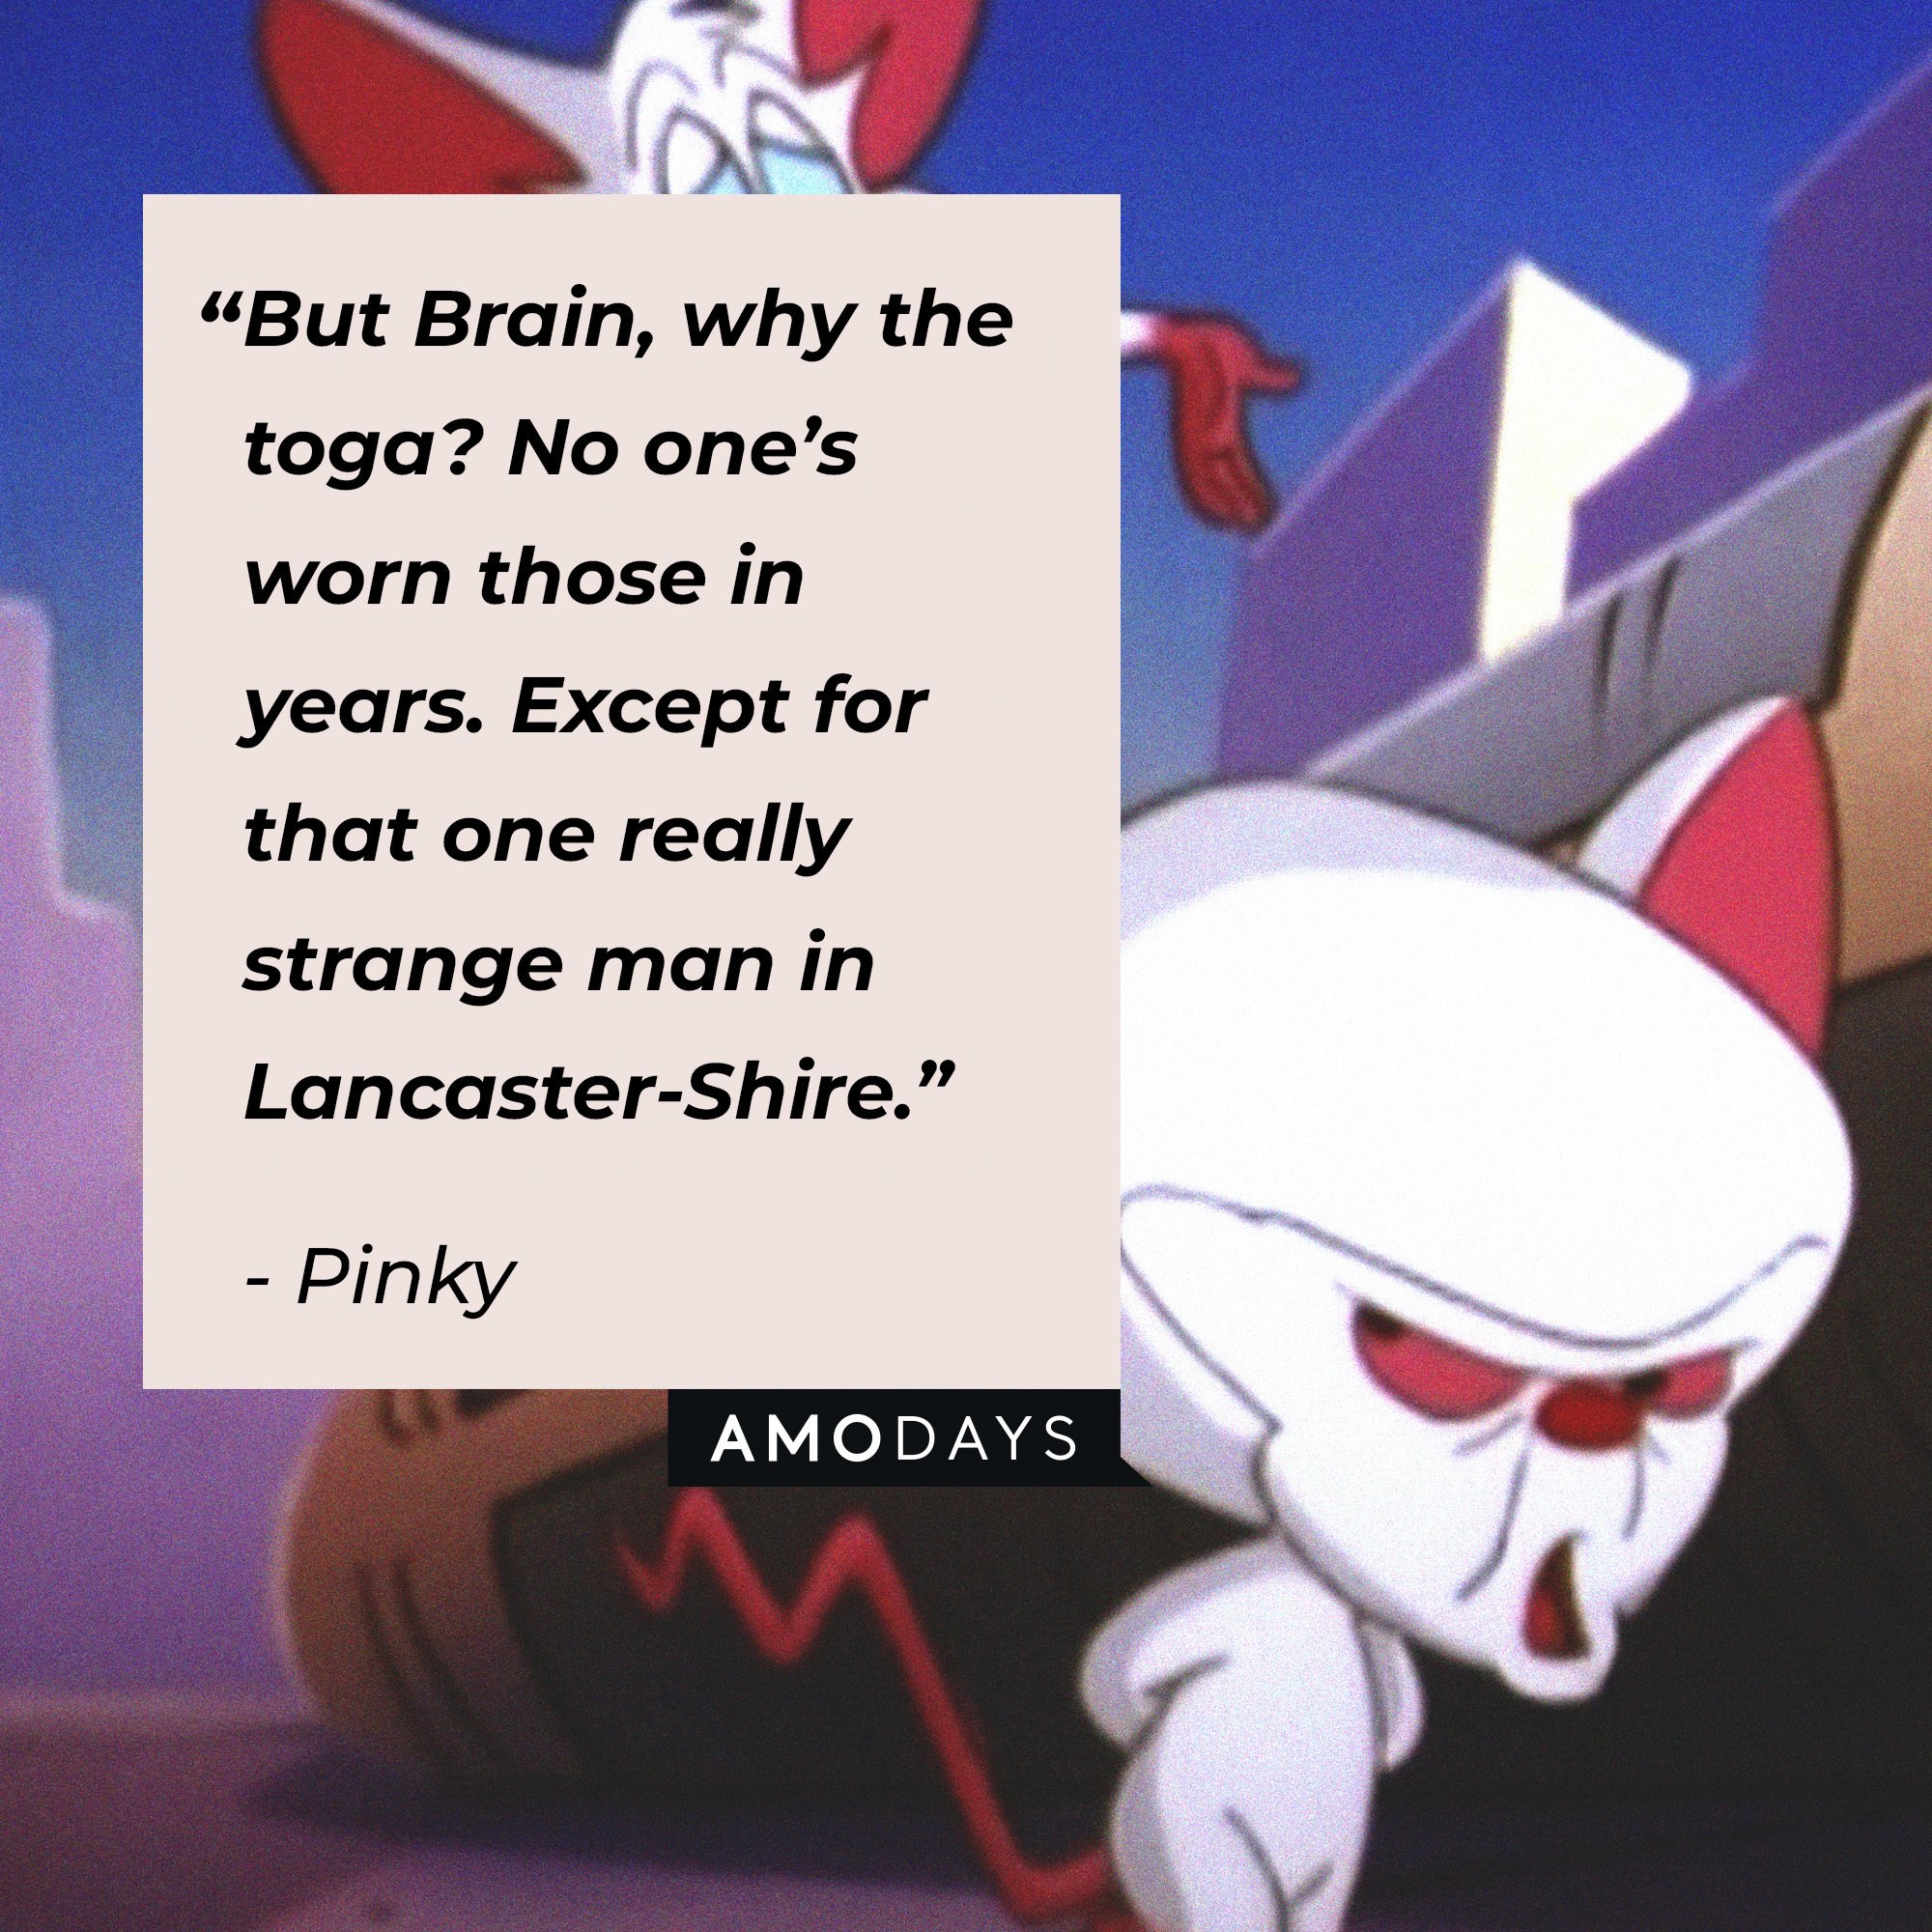 Pinky's quote: “But Brain, why the toga? No one’s worn those in years. Except for that one really strange man in Lancaster-Shire.” | Image: AmoDays 